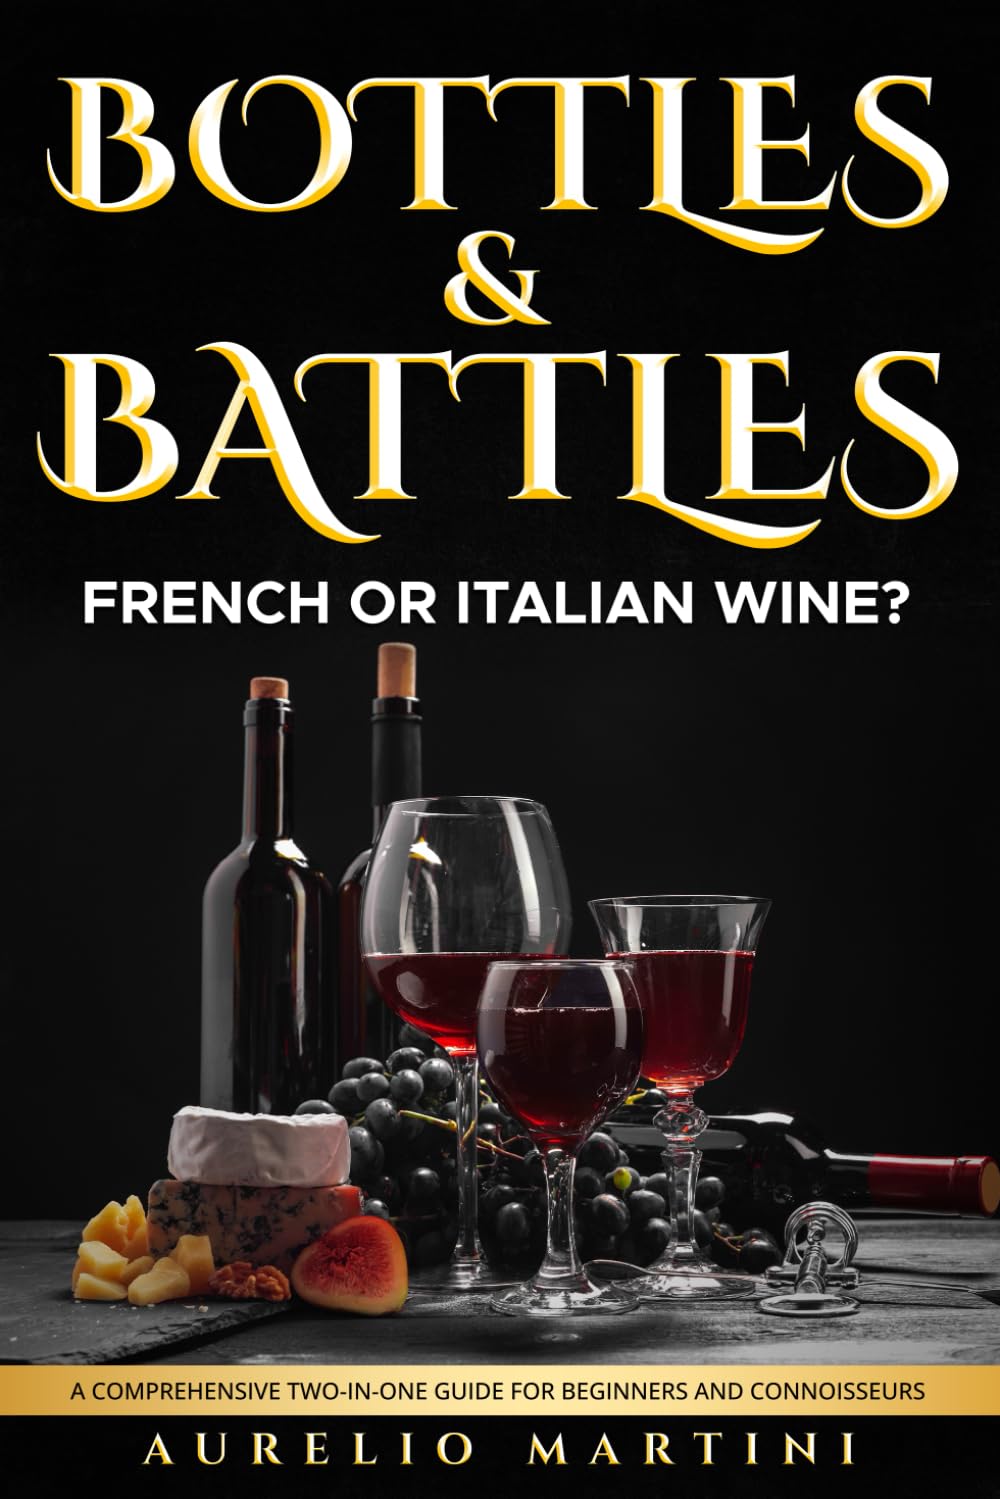 Bottles & Battles: French or Italian Wine? A Comprehensive Two-in-One Guide for Beginners and Connoisseurs (Mediterranean Hidden Gems)